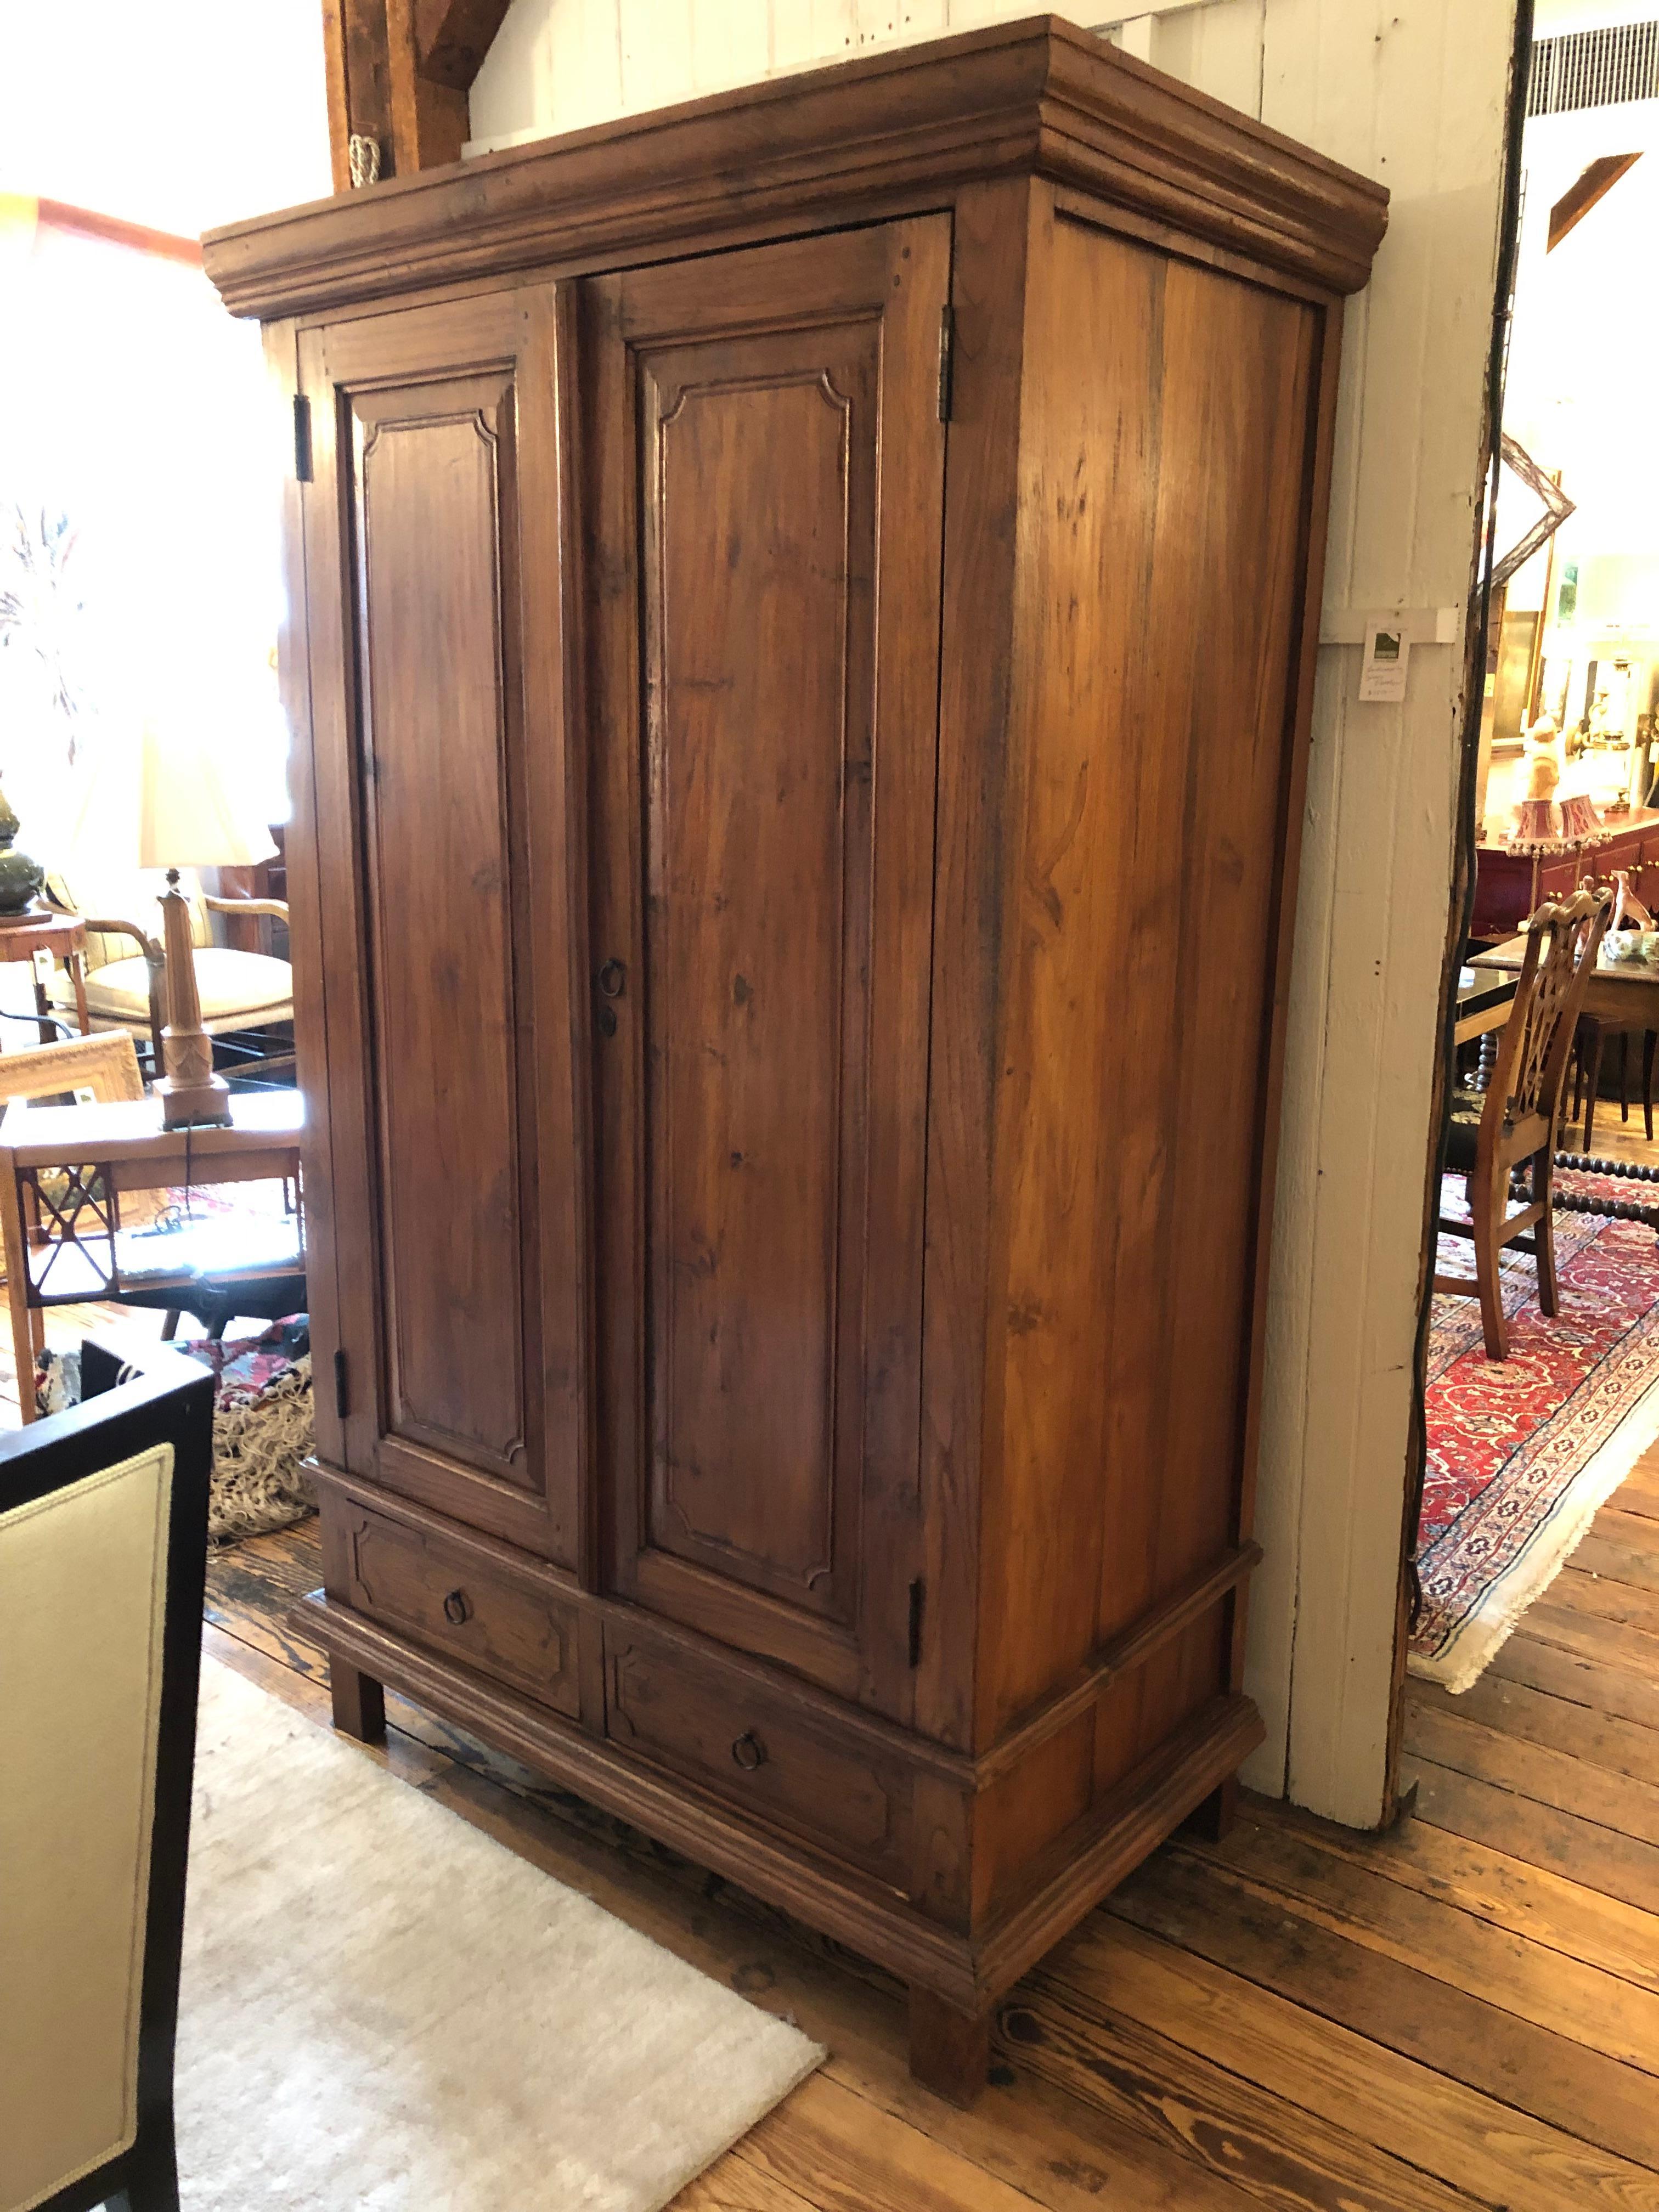 Character rich stained pine vintage armoire from Vermont, having beautiful paneled doors, original hardware, handsome top cornice and two drawers in the bottom. Interior has 4 shelves and a hole to allow stereo equipment wire. Lots of room for